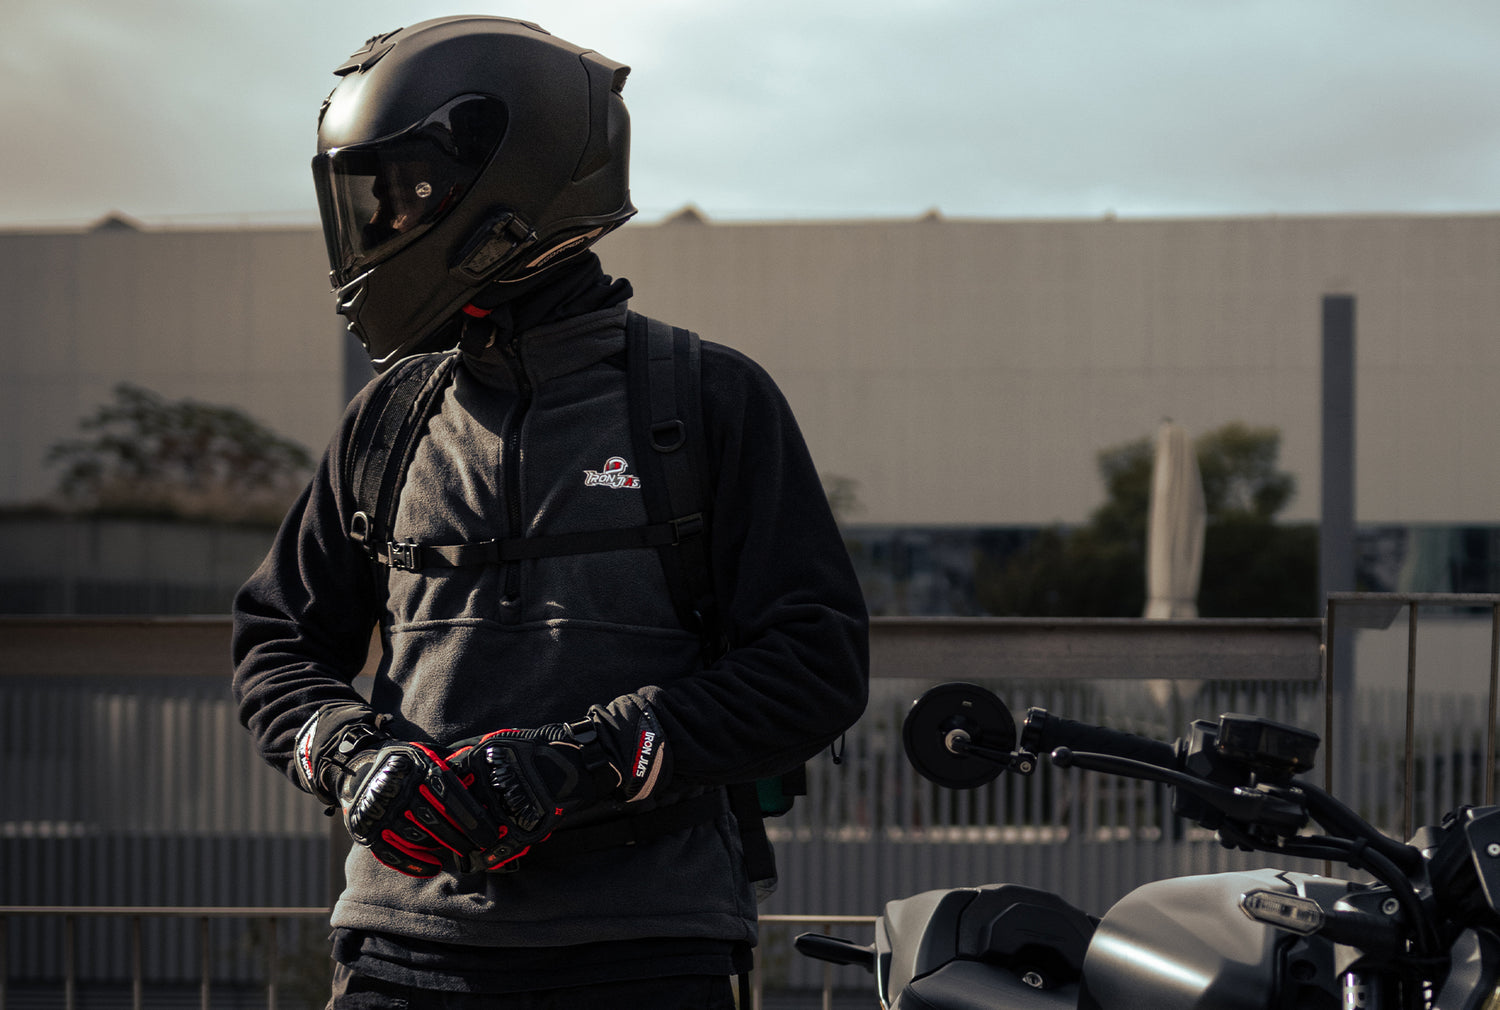 8 Best Protective Gear Products for Winter Riding